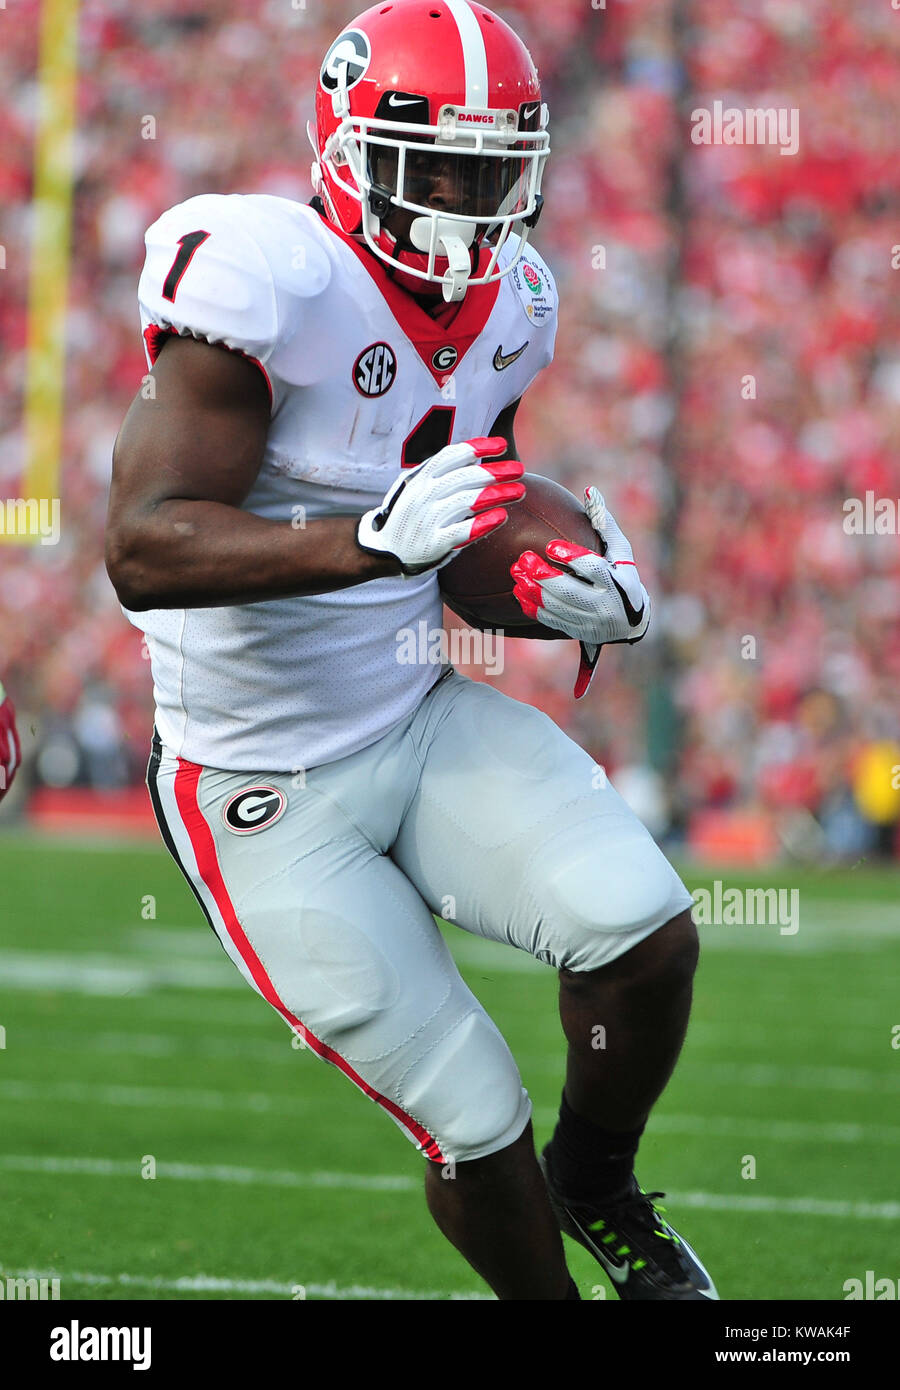 Pasadena, California, USA. 01st Jan, 2018. Georgia Bulldogs running back Sony Michel #1 scores in the 1st half during the 2018 Rose Bowl semi-final game between the Oklahoma Sooners and the Georgia Bulldogs at the Rose Bowl Stadium in Pasadena, CA. John Green/CSM Credit: Cal Sport Media/Alamy Live News Stock Photo